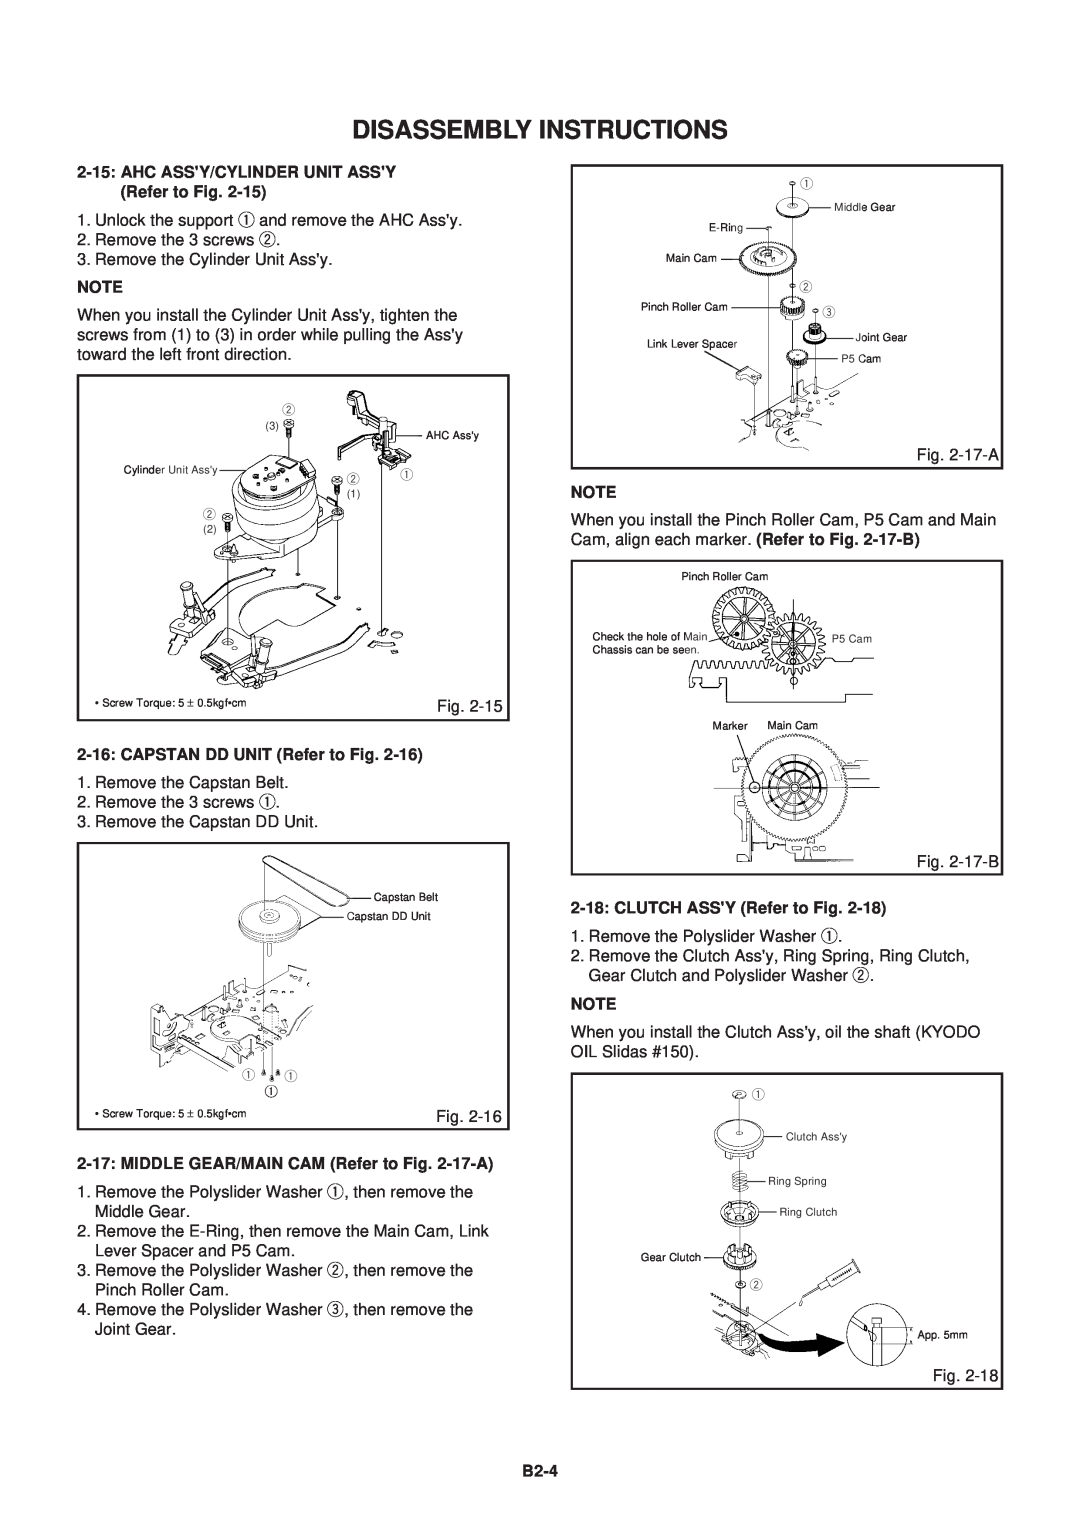 Aiwa HV-FX5100 Disassembly Instructions, AHC ASSY/CYLINDER UNIT ASSY Refer to Fig, CAPSTAN DD UNIT Refer to Fig, B2-4 